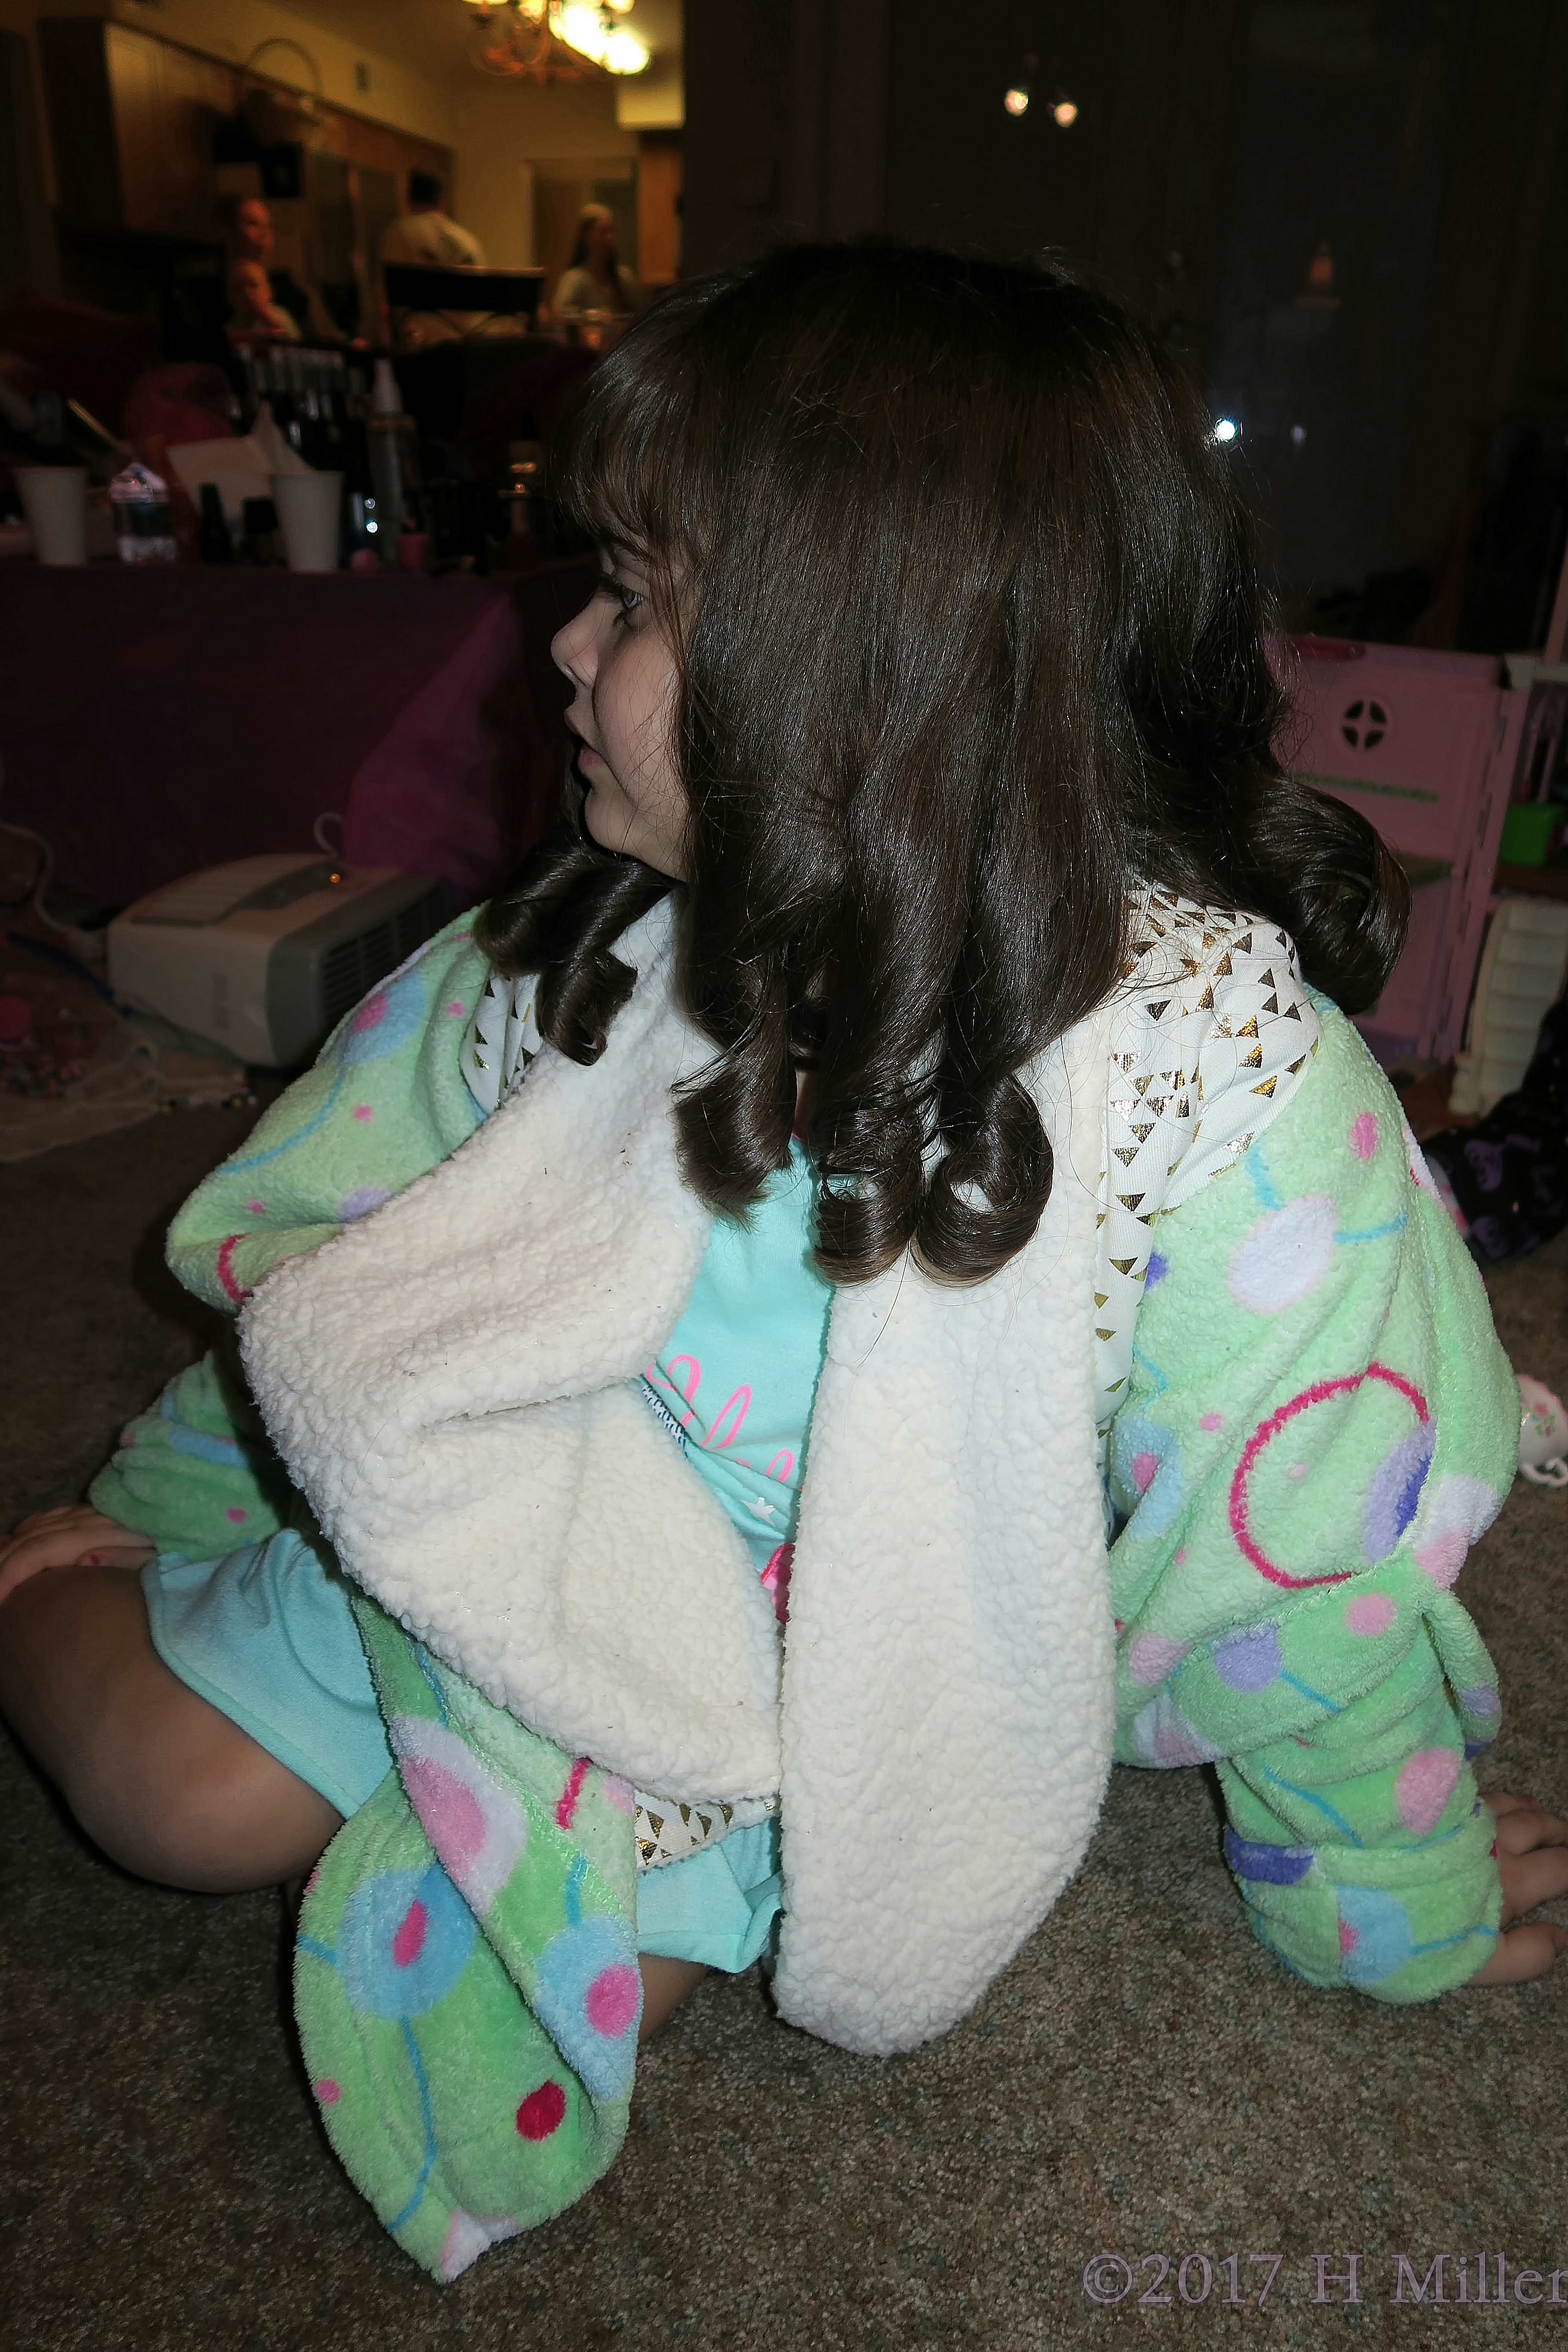 Curled Ringlets Of Hair Are So Pretty On This Kids Hairstyle! 